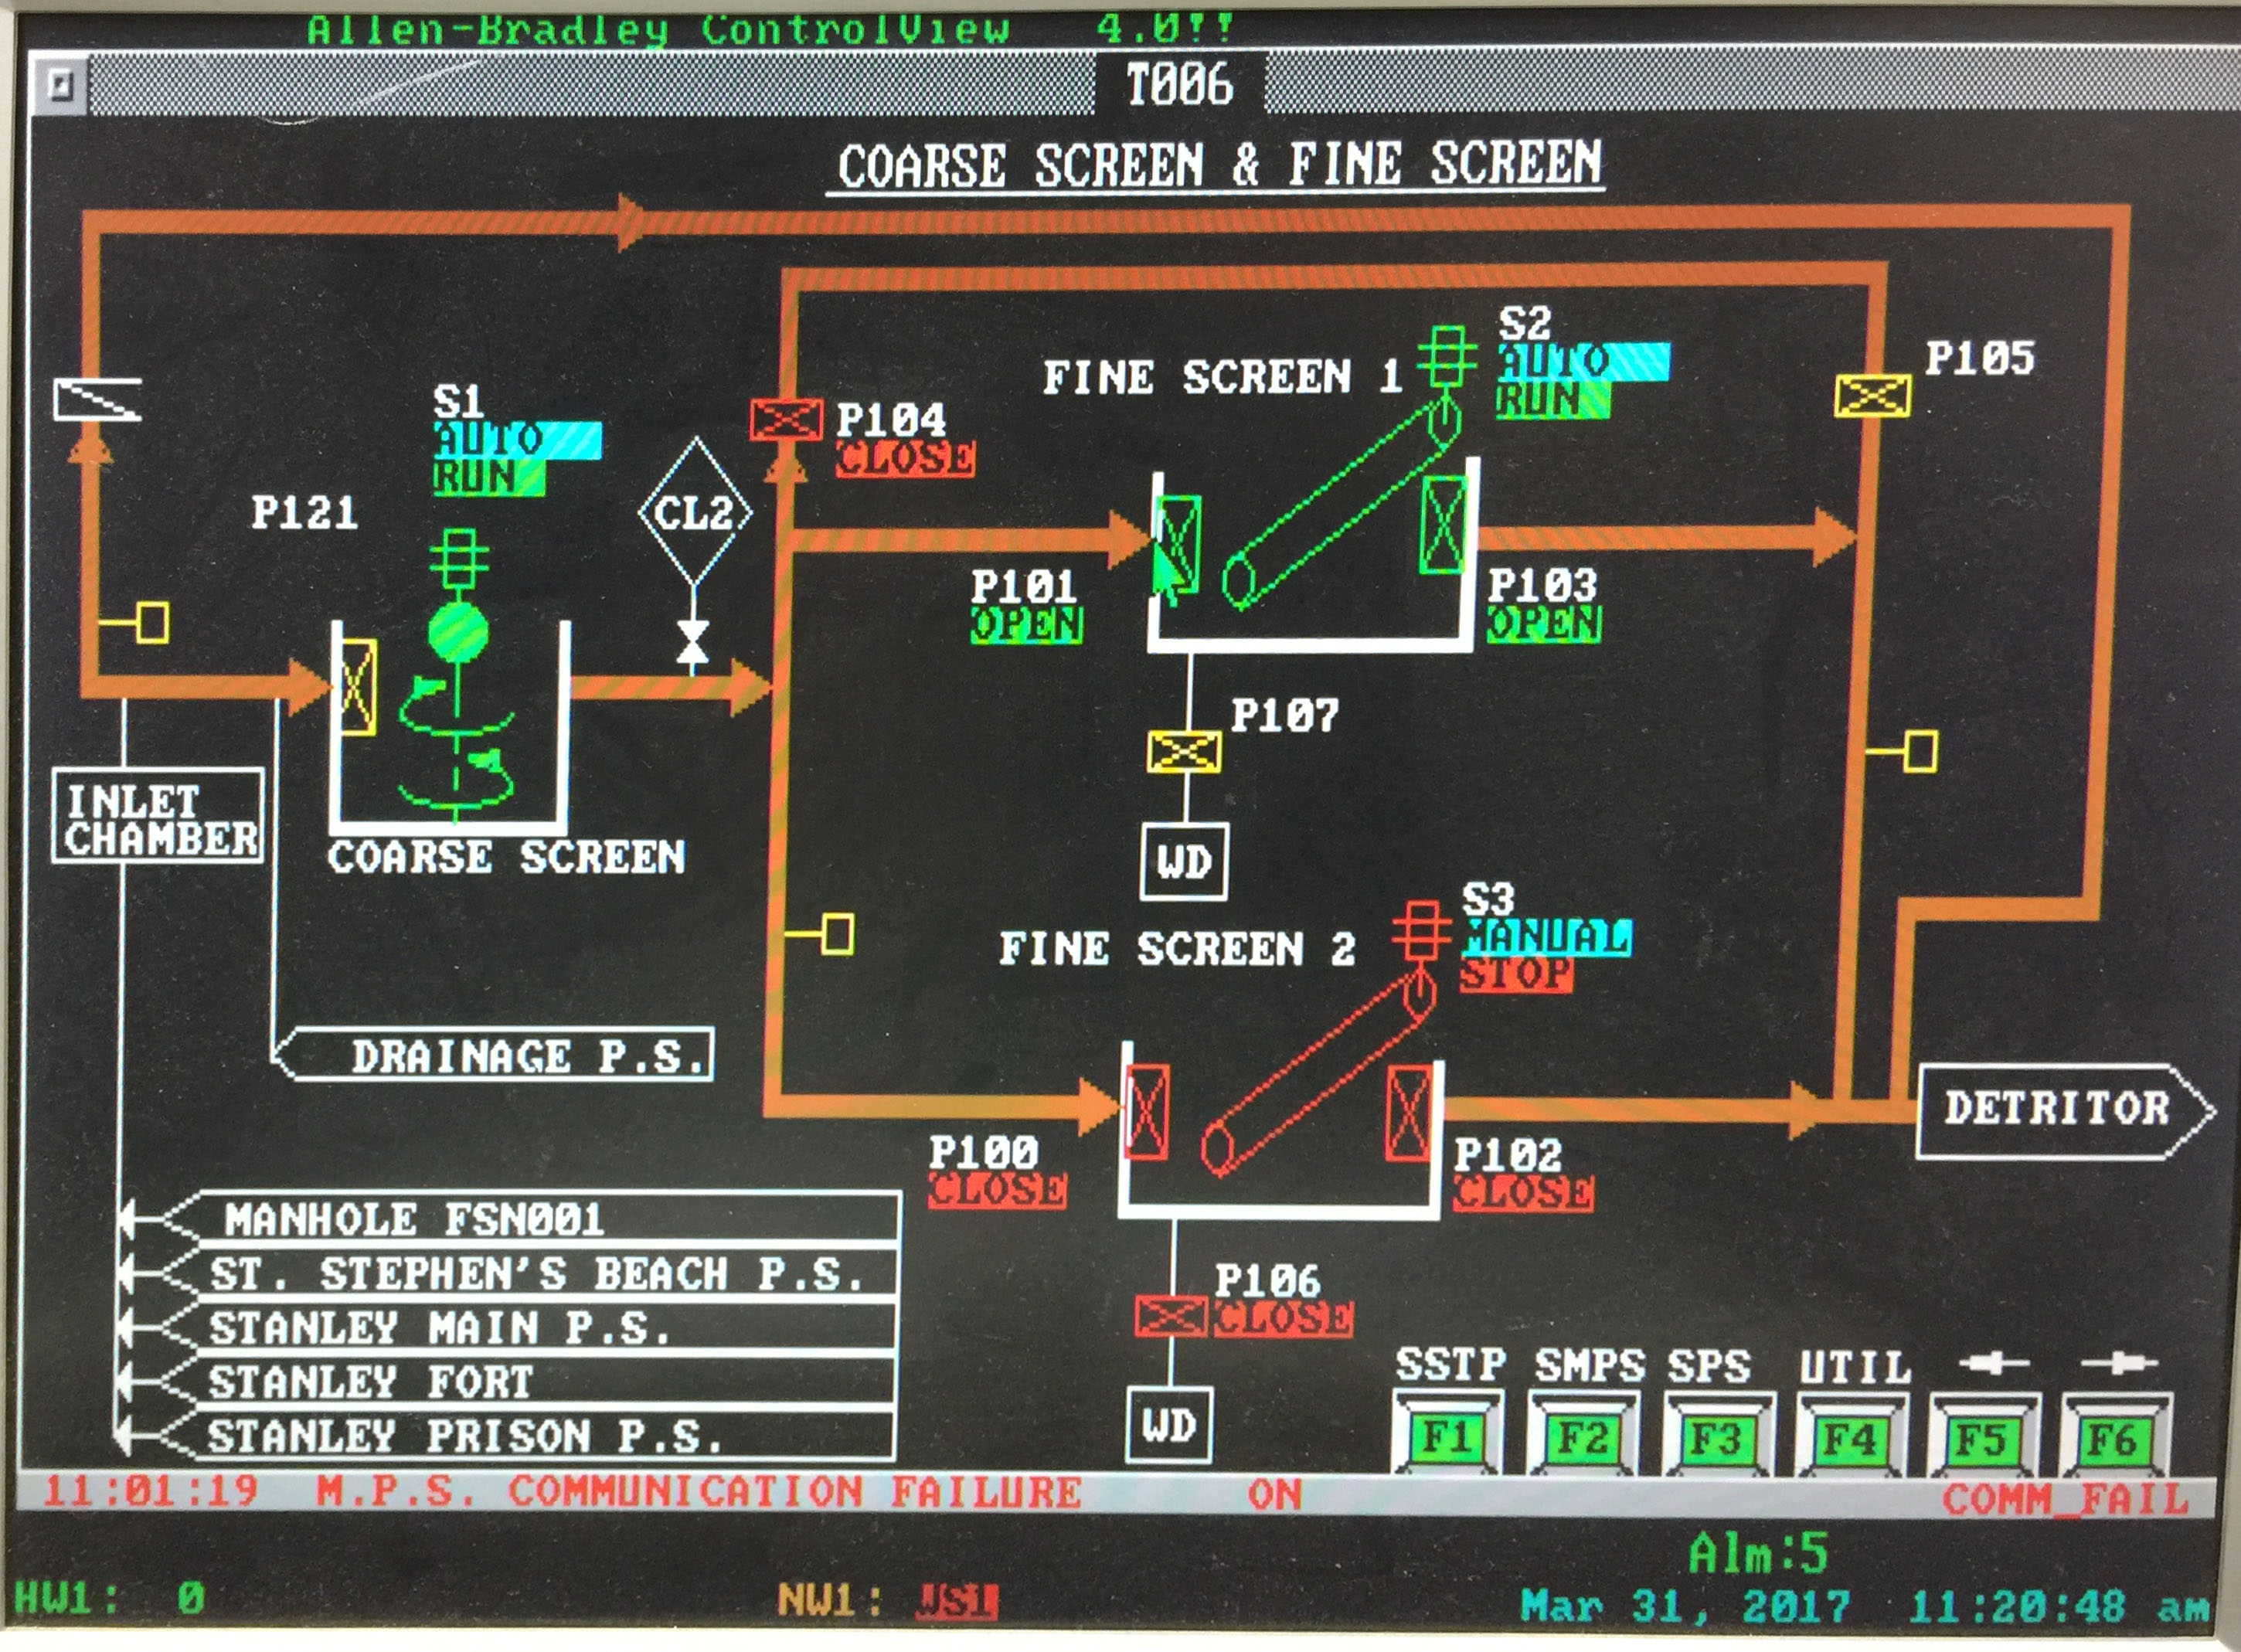 Part of Inlet Screen System screenshot from ControlView Before Works in DSD Stanley STW (Typical)